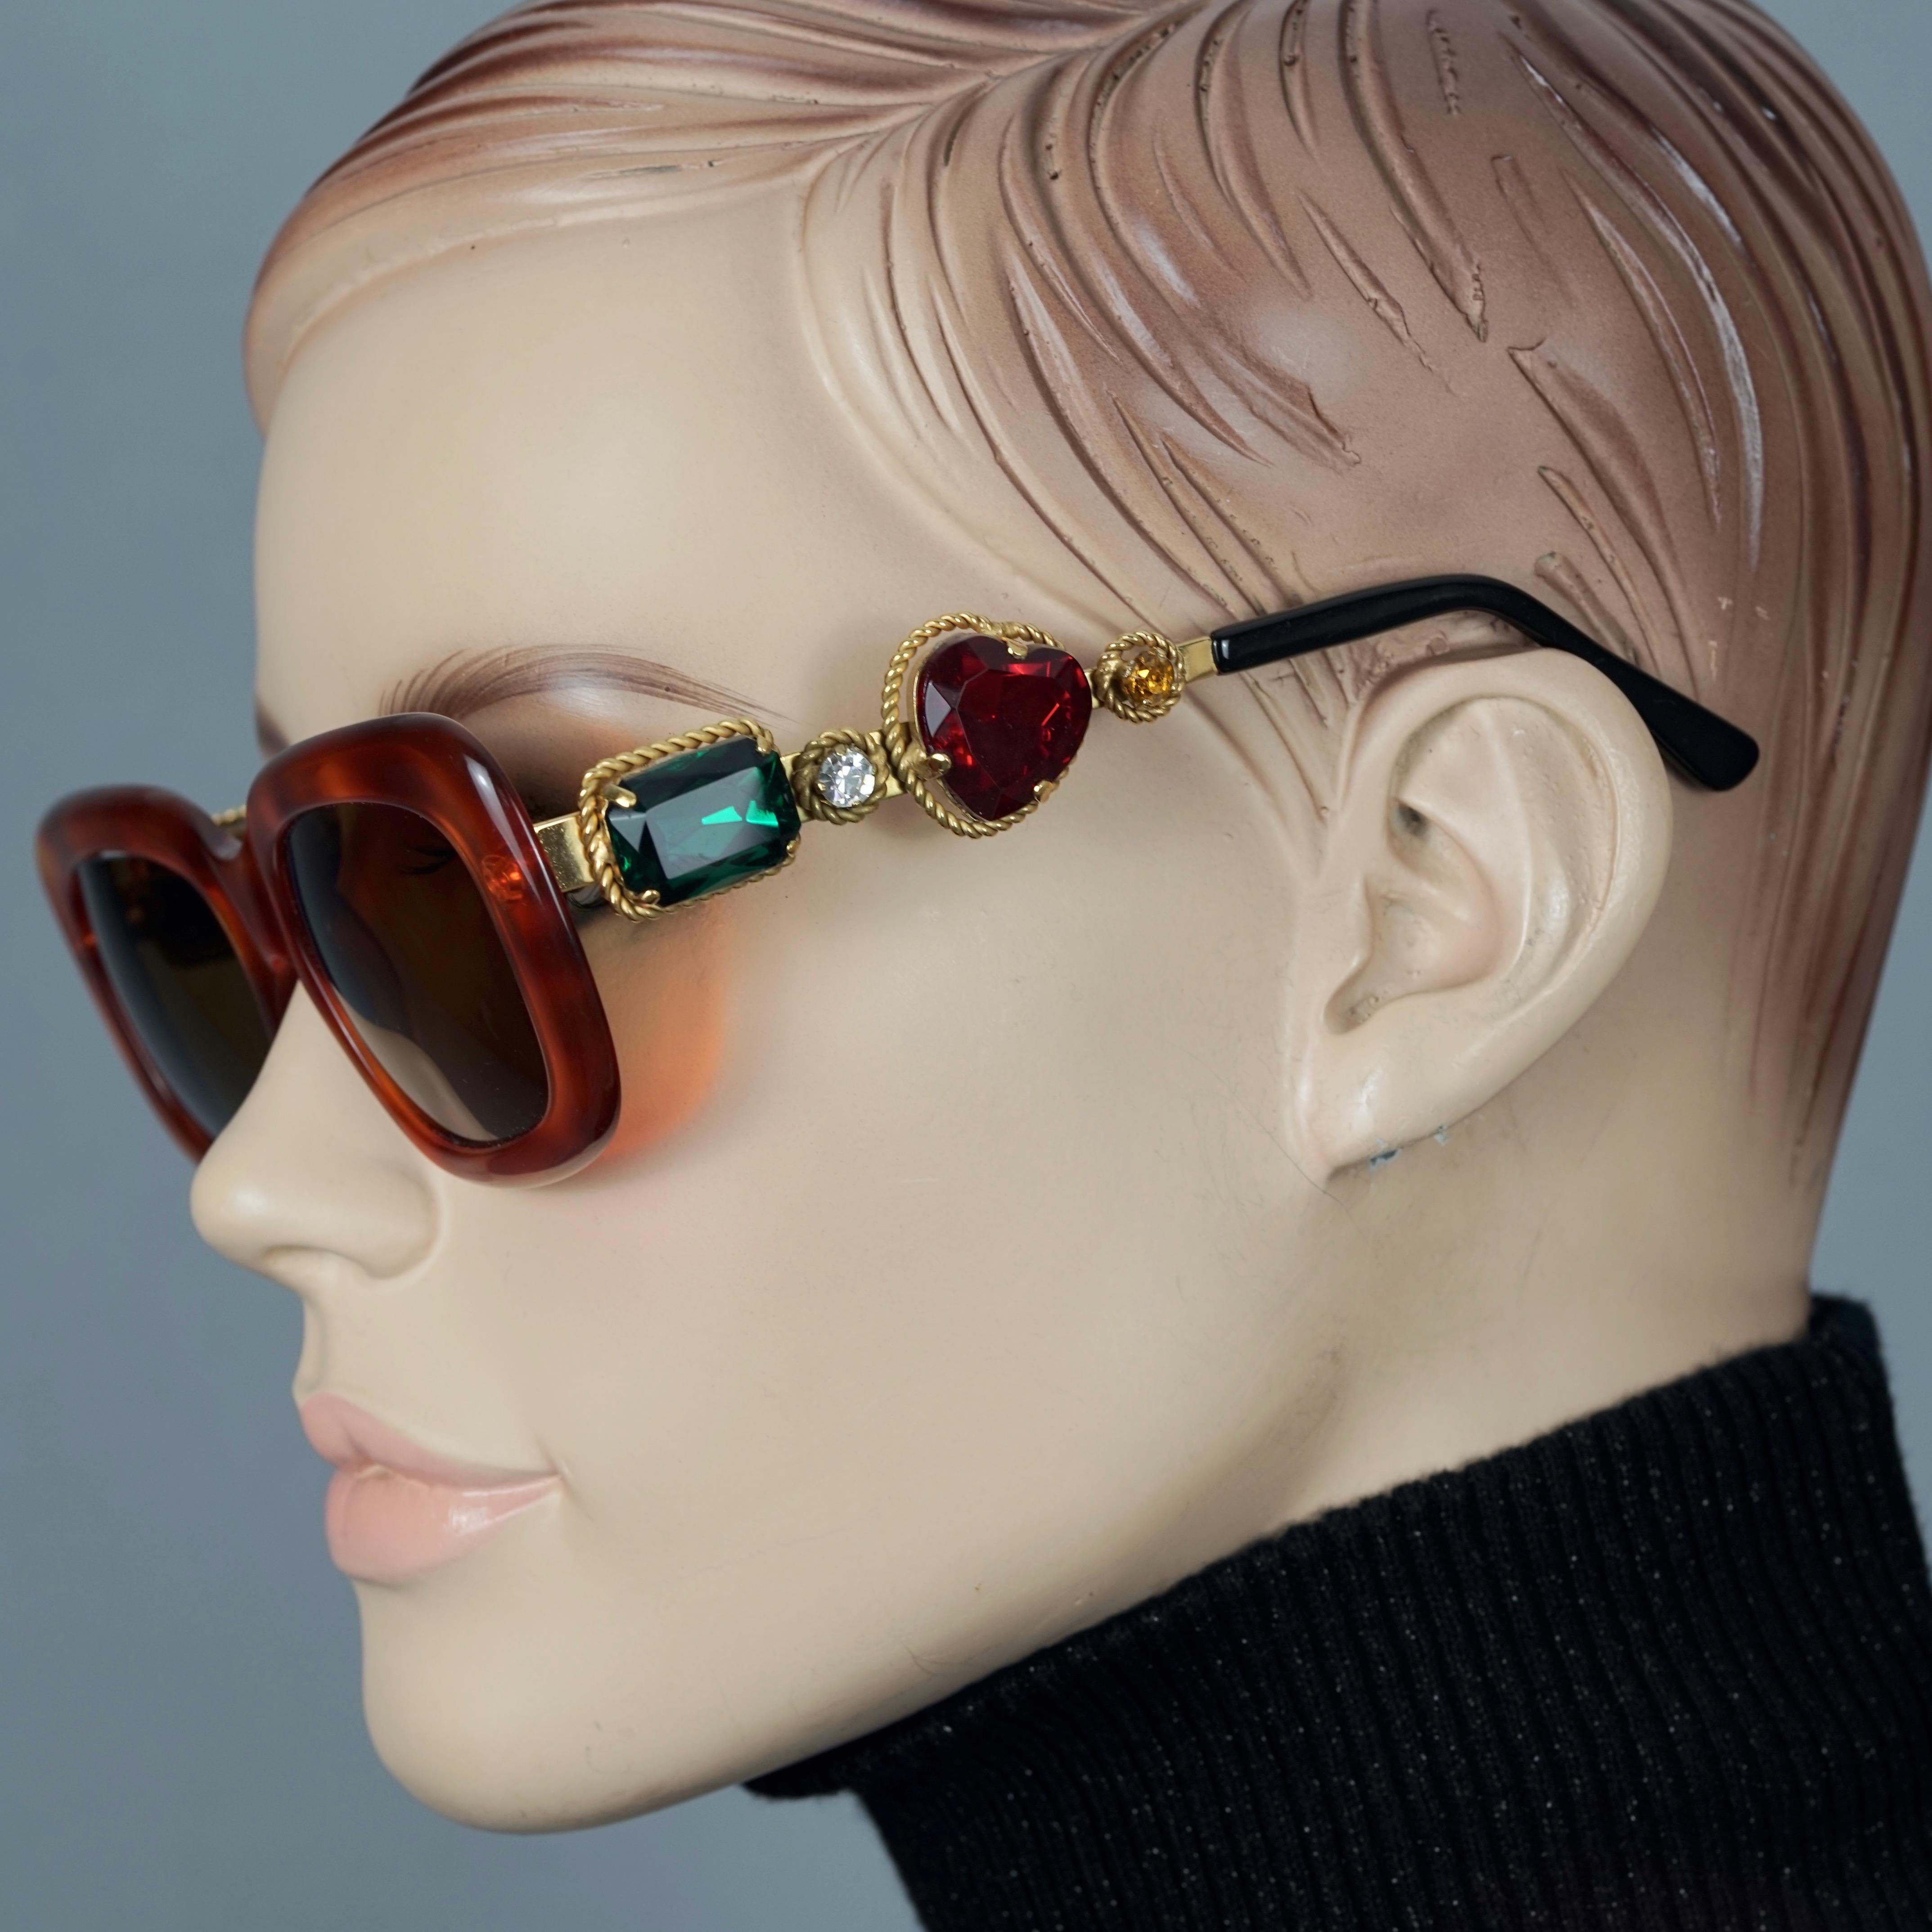 Vintage MOSCHINO Jewelled Tortoiseshell Sunglasses

Measurements:
Height: 1.97 inches (5 cm)
Horizontal Width: 5.75 inches  (14.6 cm)
Temples: 5.12 inches  (13 cm)

Features:
- 100% Authentic MOSCHINO. 
- Jewelled rectangular faux tortoiseshell